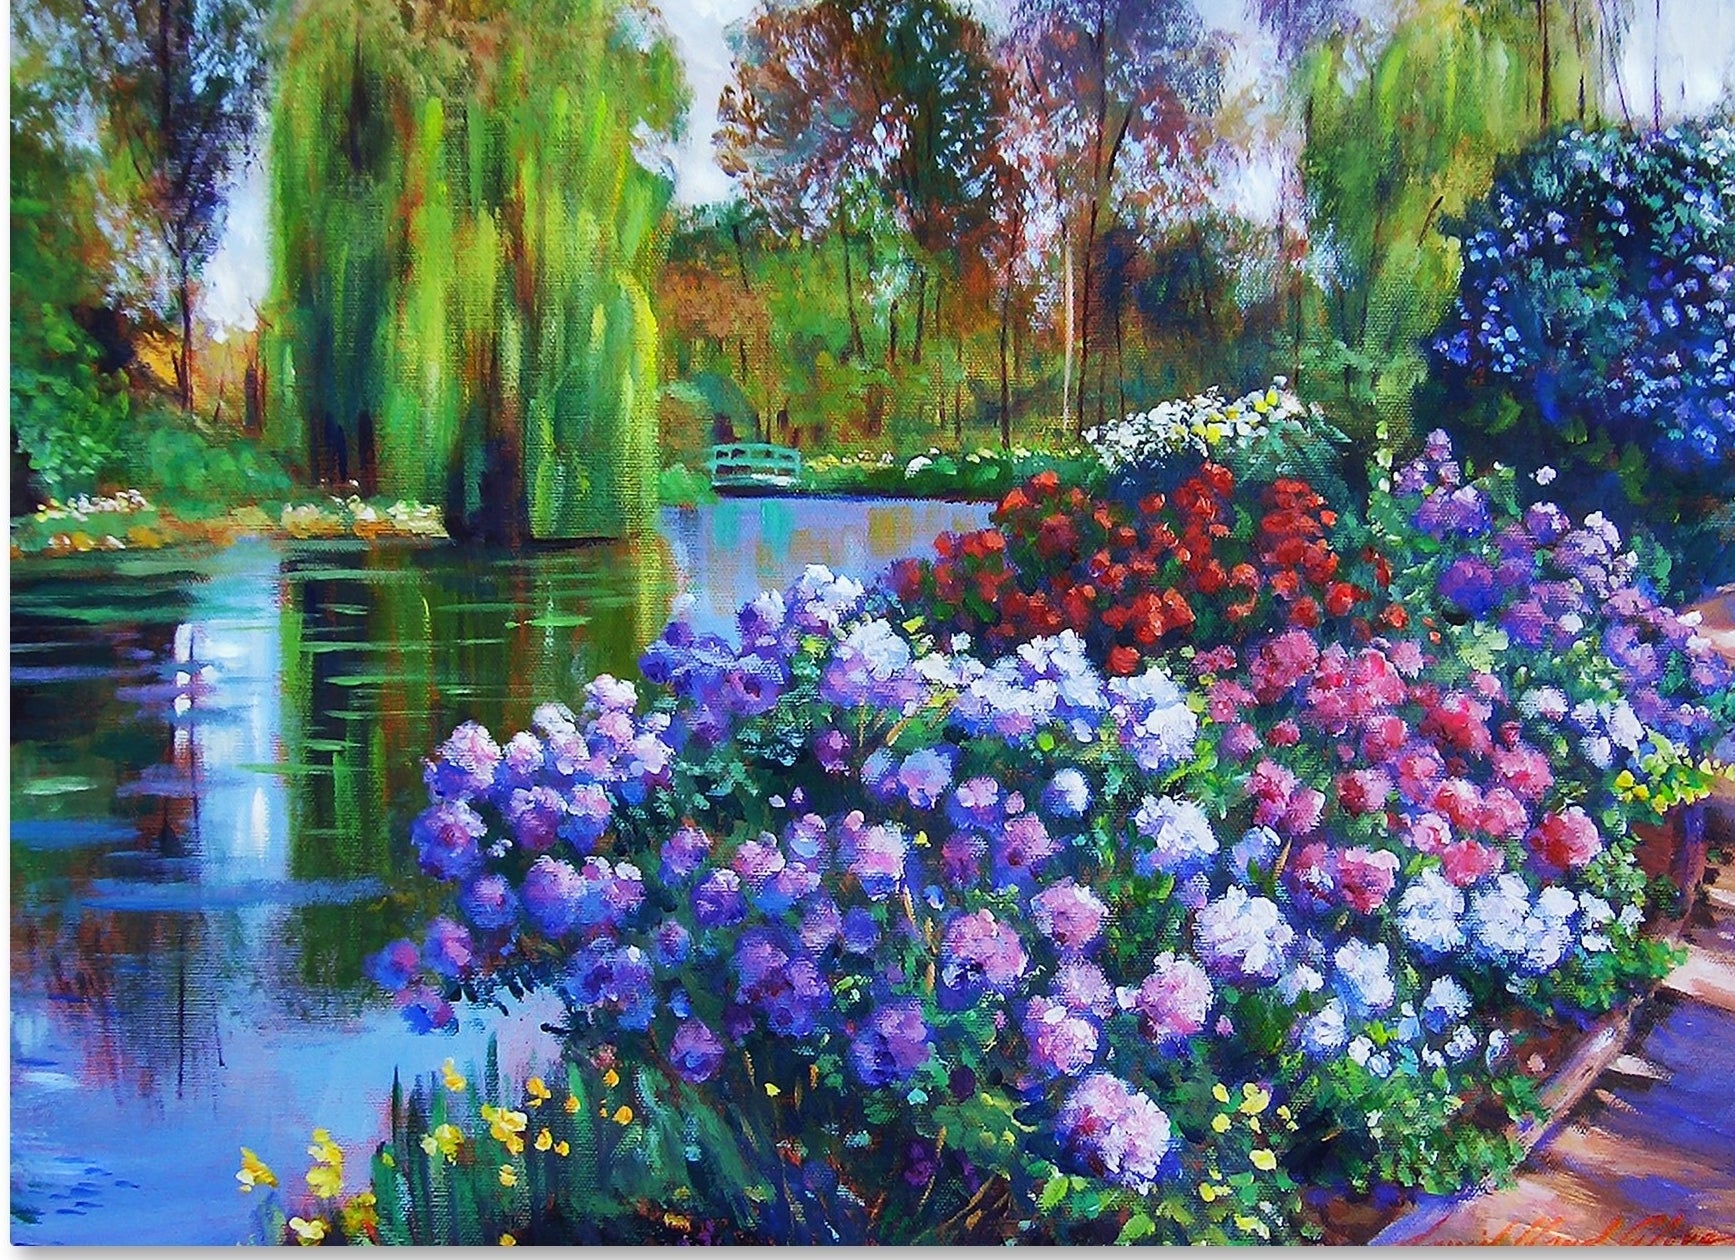 The painting of various colorful flowers along a river